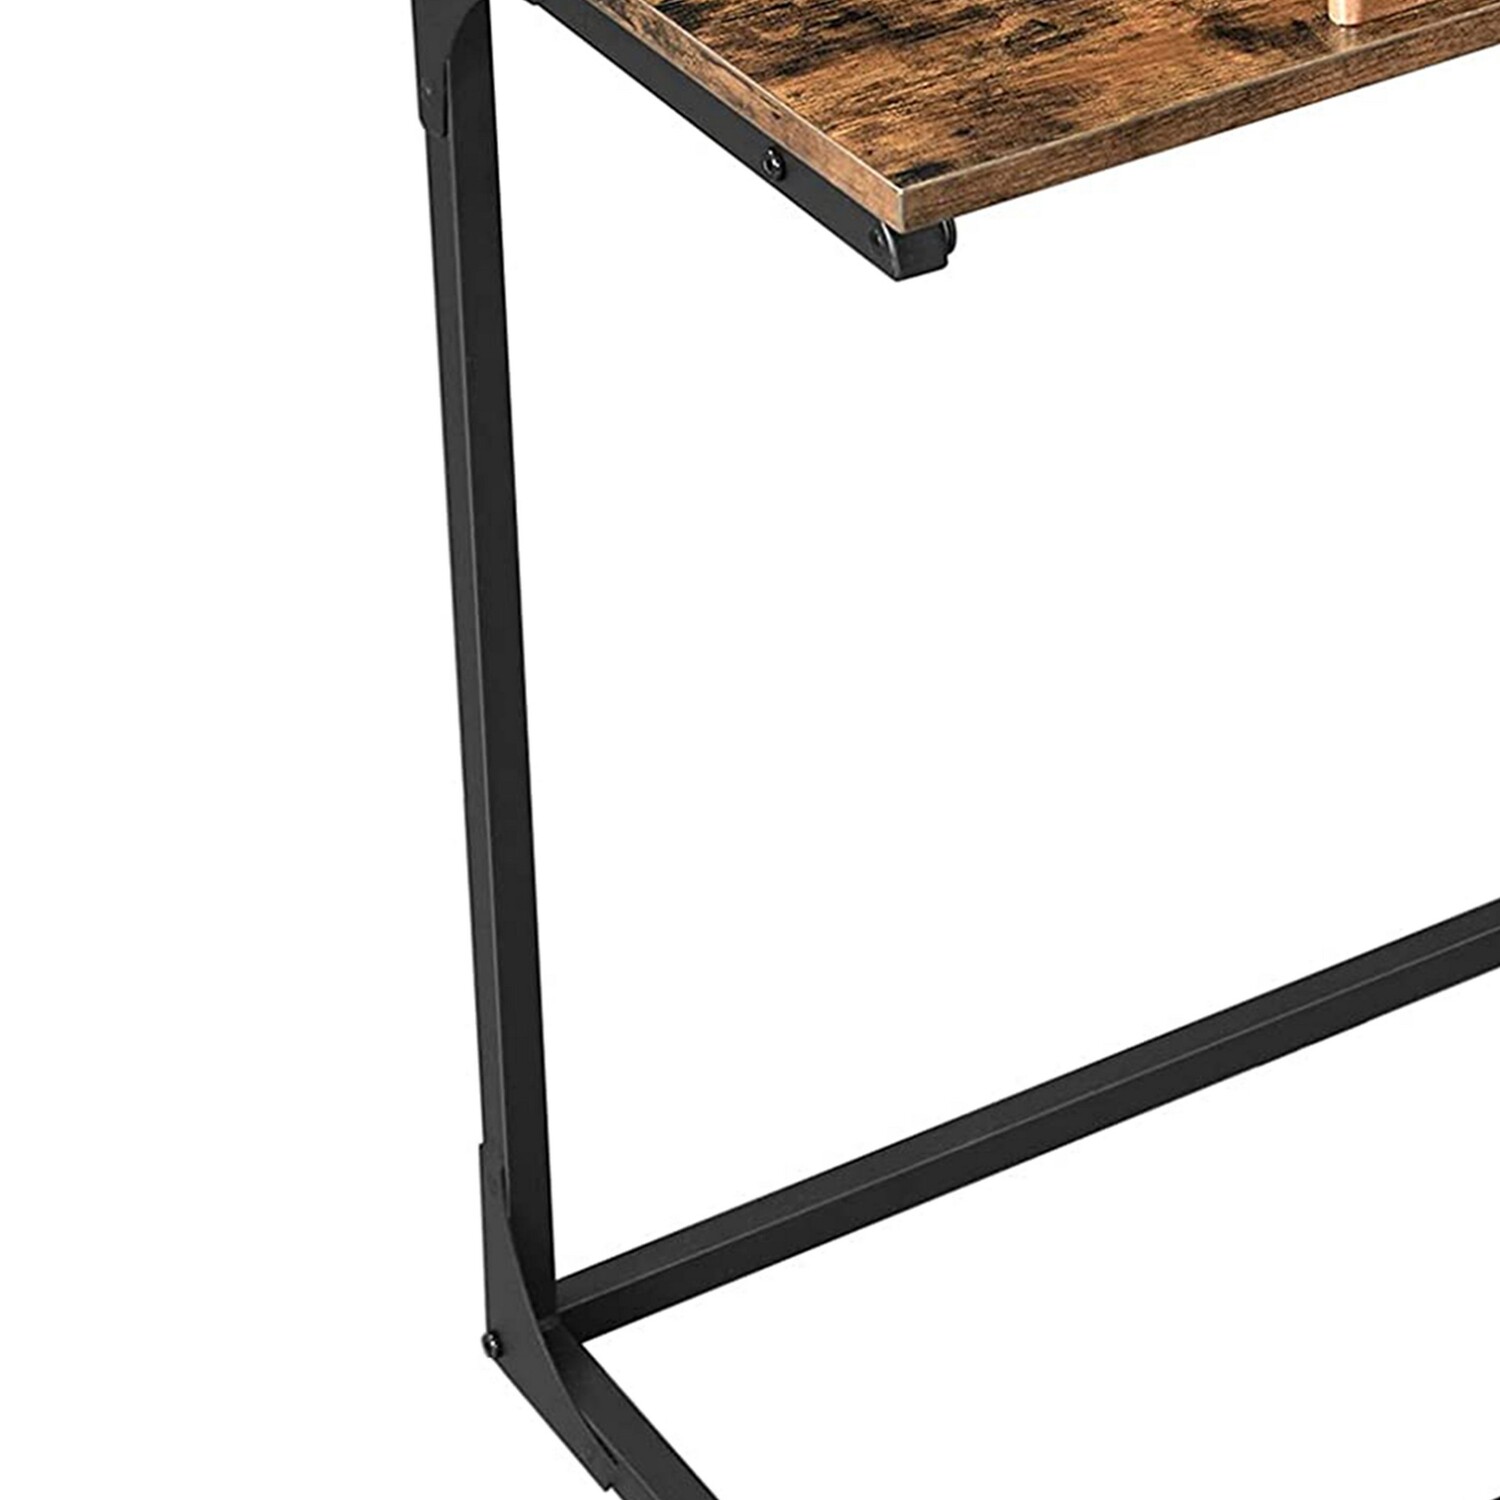 Metal Laptop Table with Tilting Wooden Top and Grains, Brown and Black - image 3 of 5